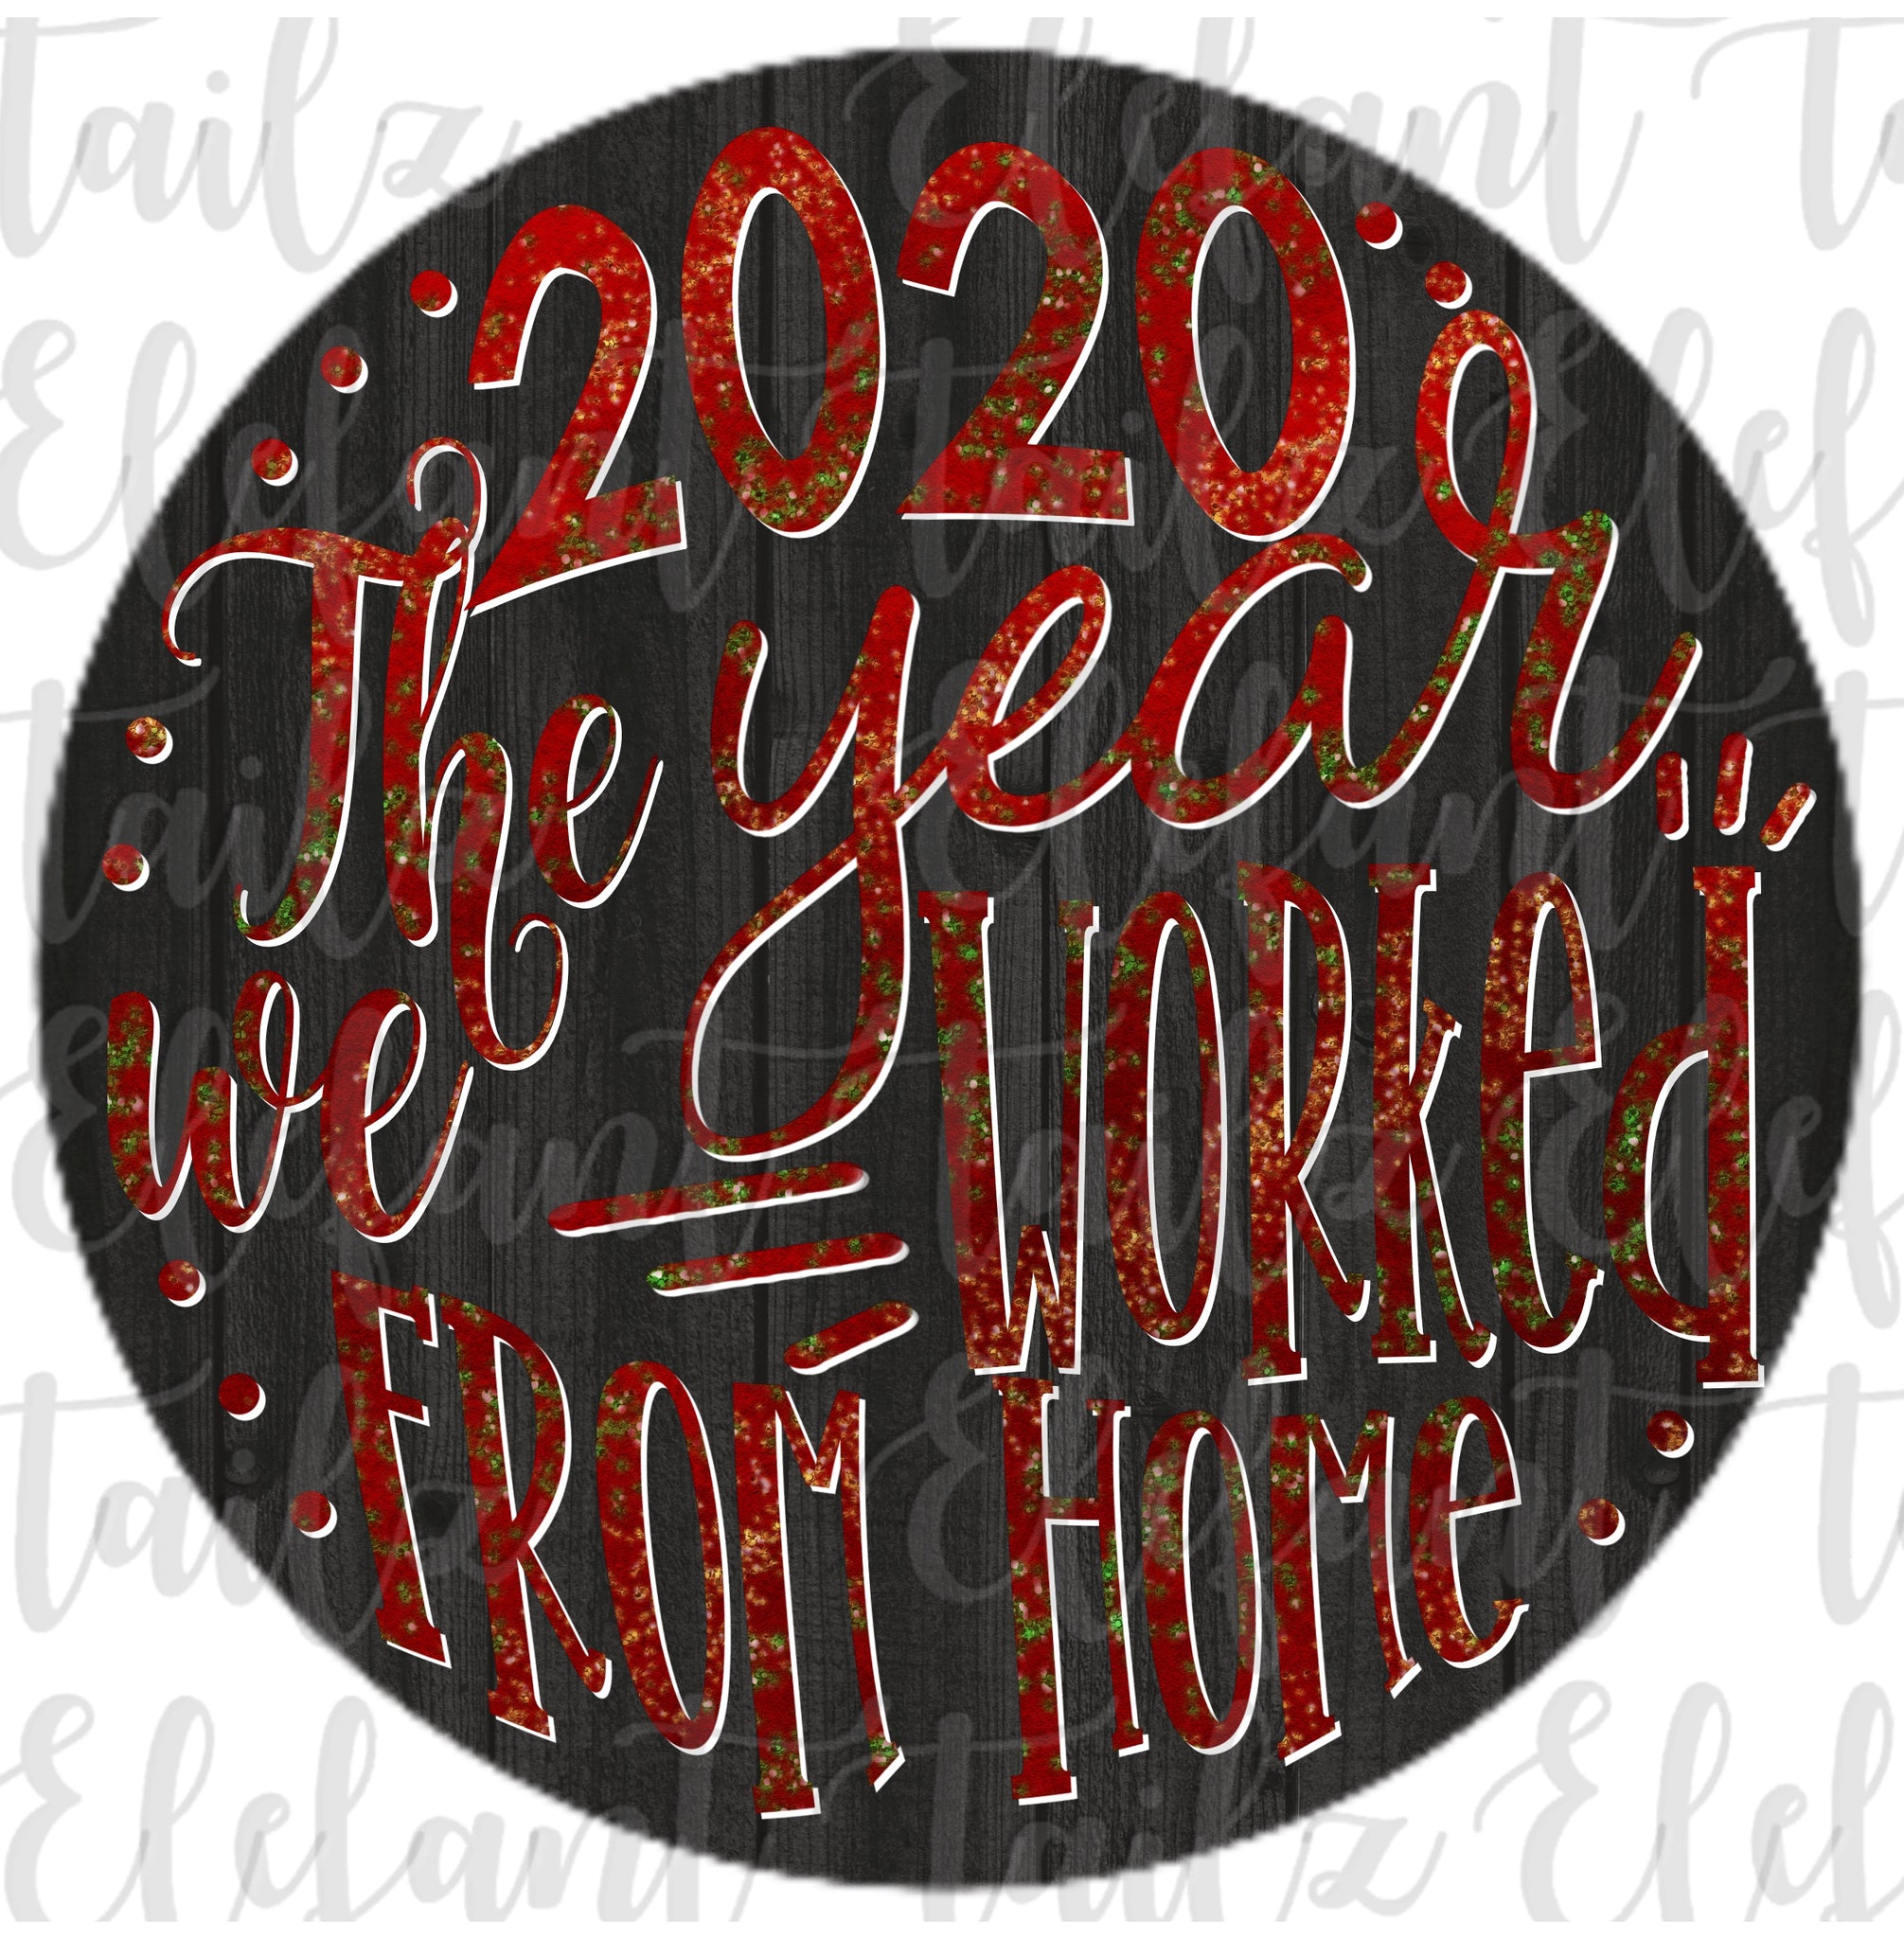 Ornament Rounds - 2020 Year Worked From Home #1